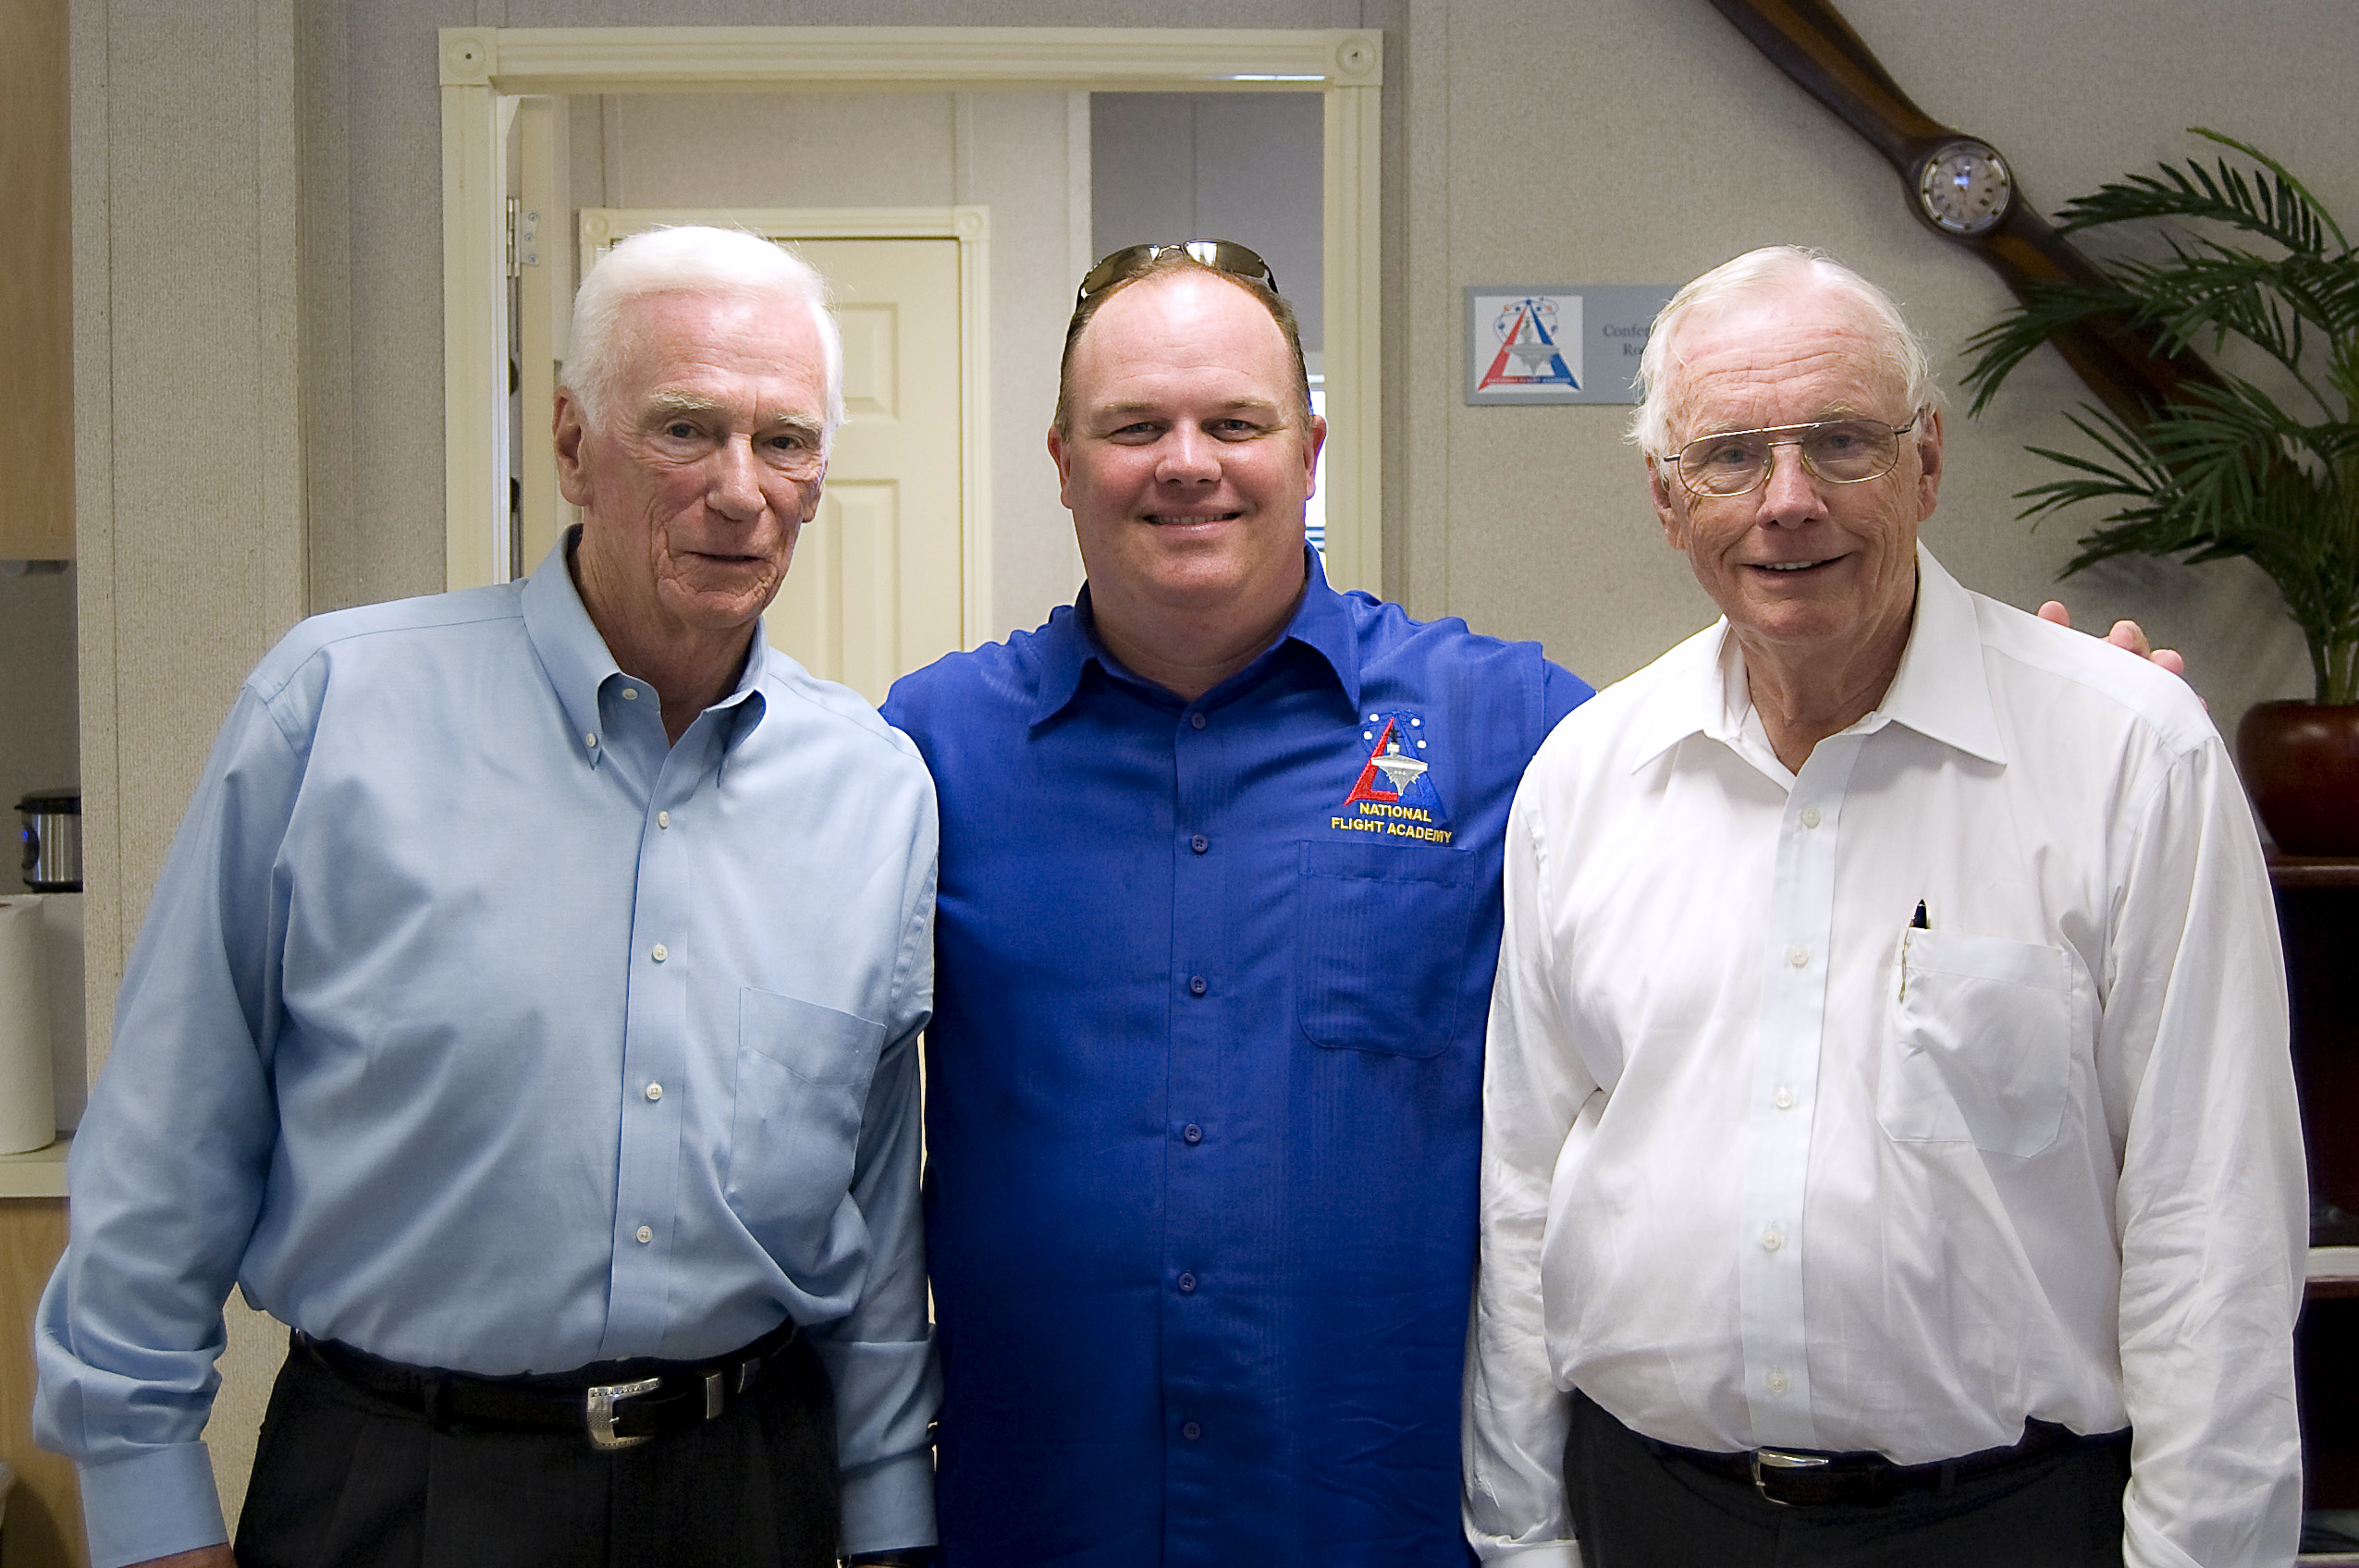 National Flight Academy 2010, Chip with Gene Cernan and Neil Armstrong